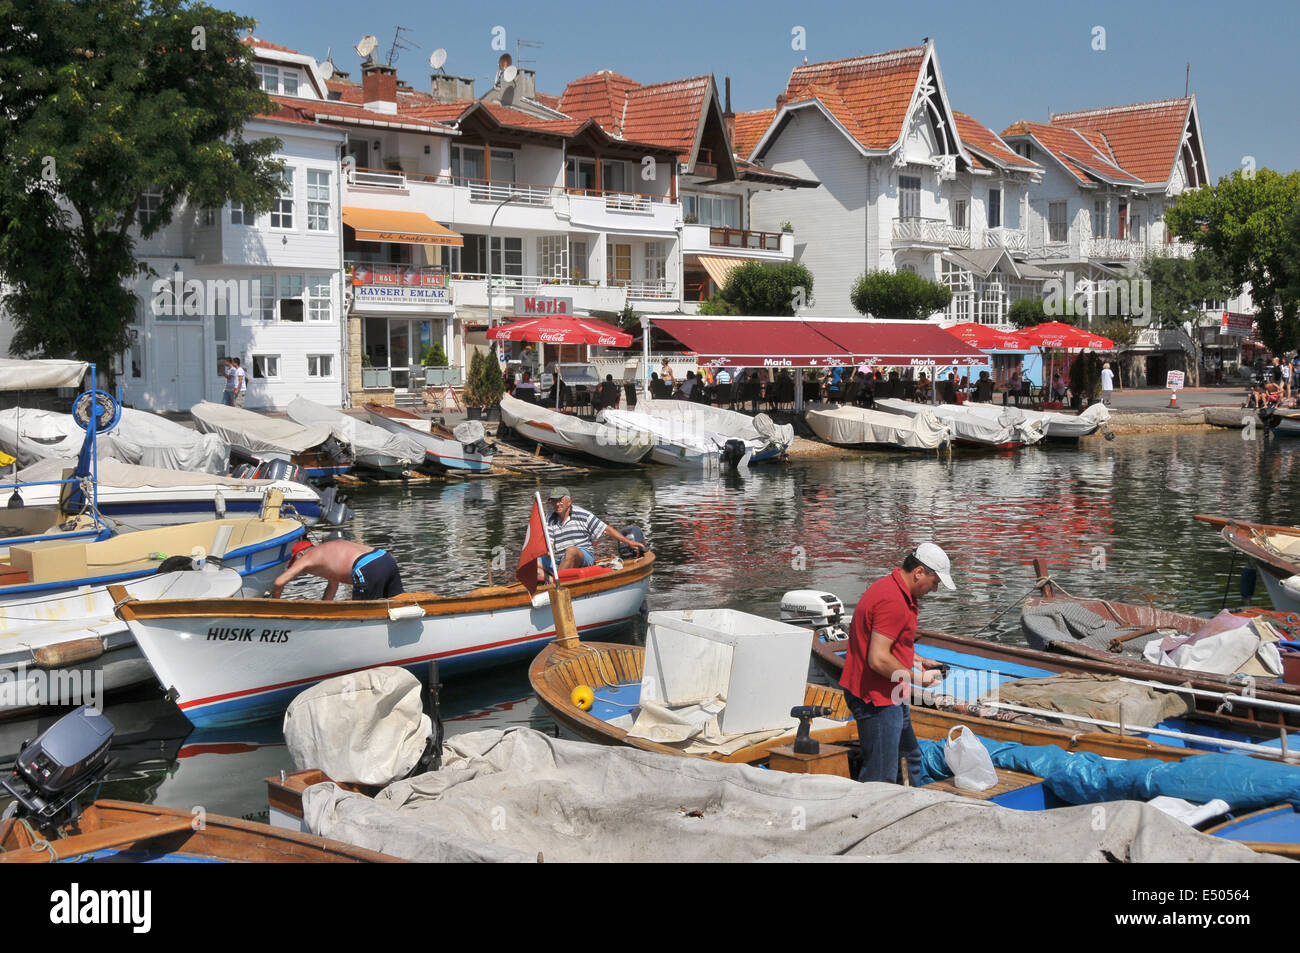 The little harbour on Kinaliada, one of the Prince's Islands.  The Islands are located in the Sea of Marmara, a short distance f Stock Photo